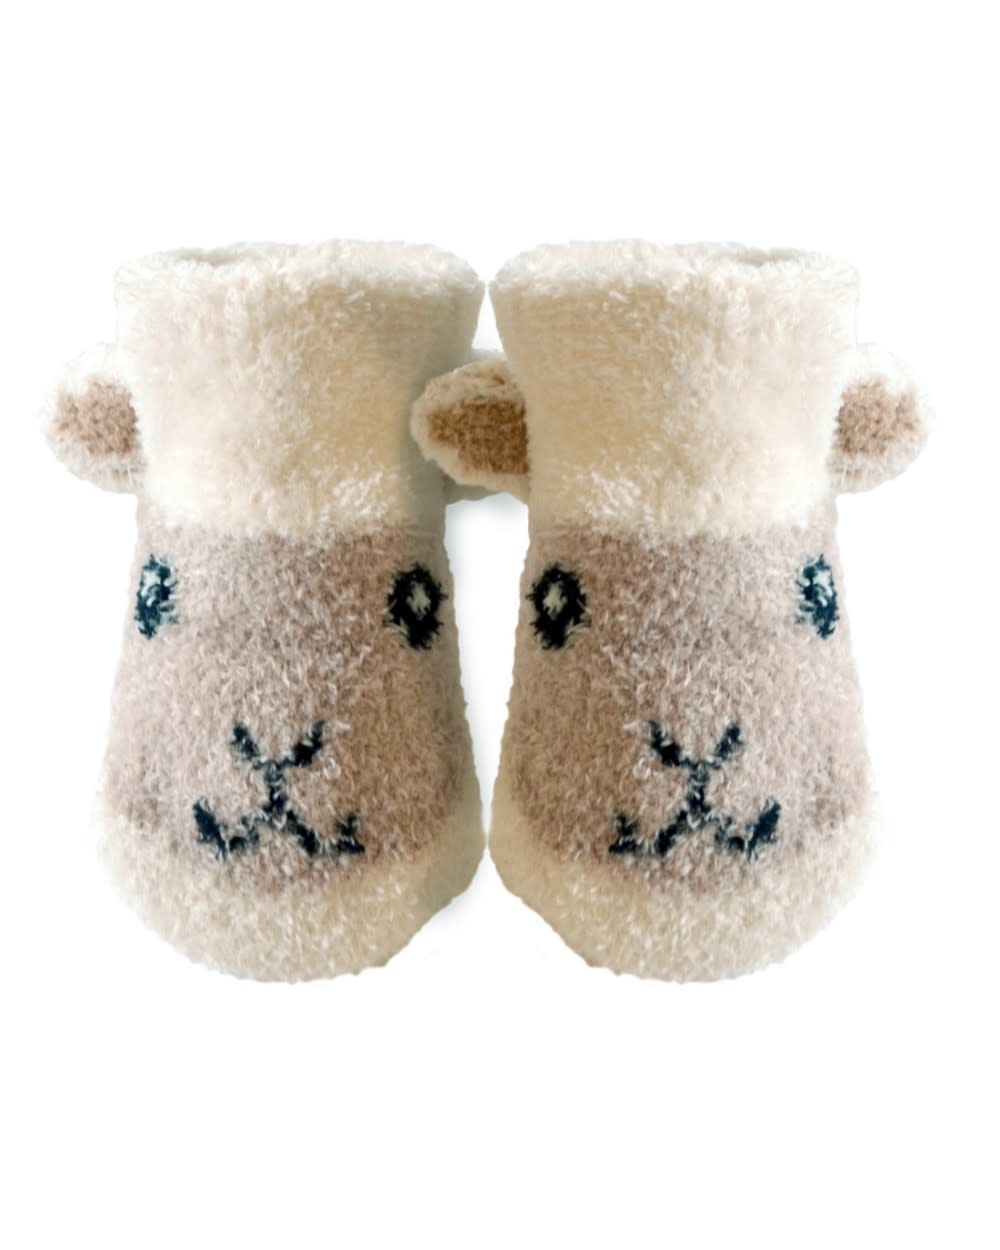 BABY CLOTHES CREAM SHEEP BABY BOOTIES